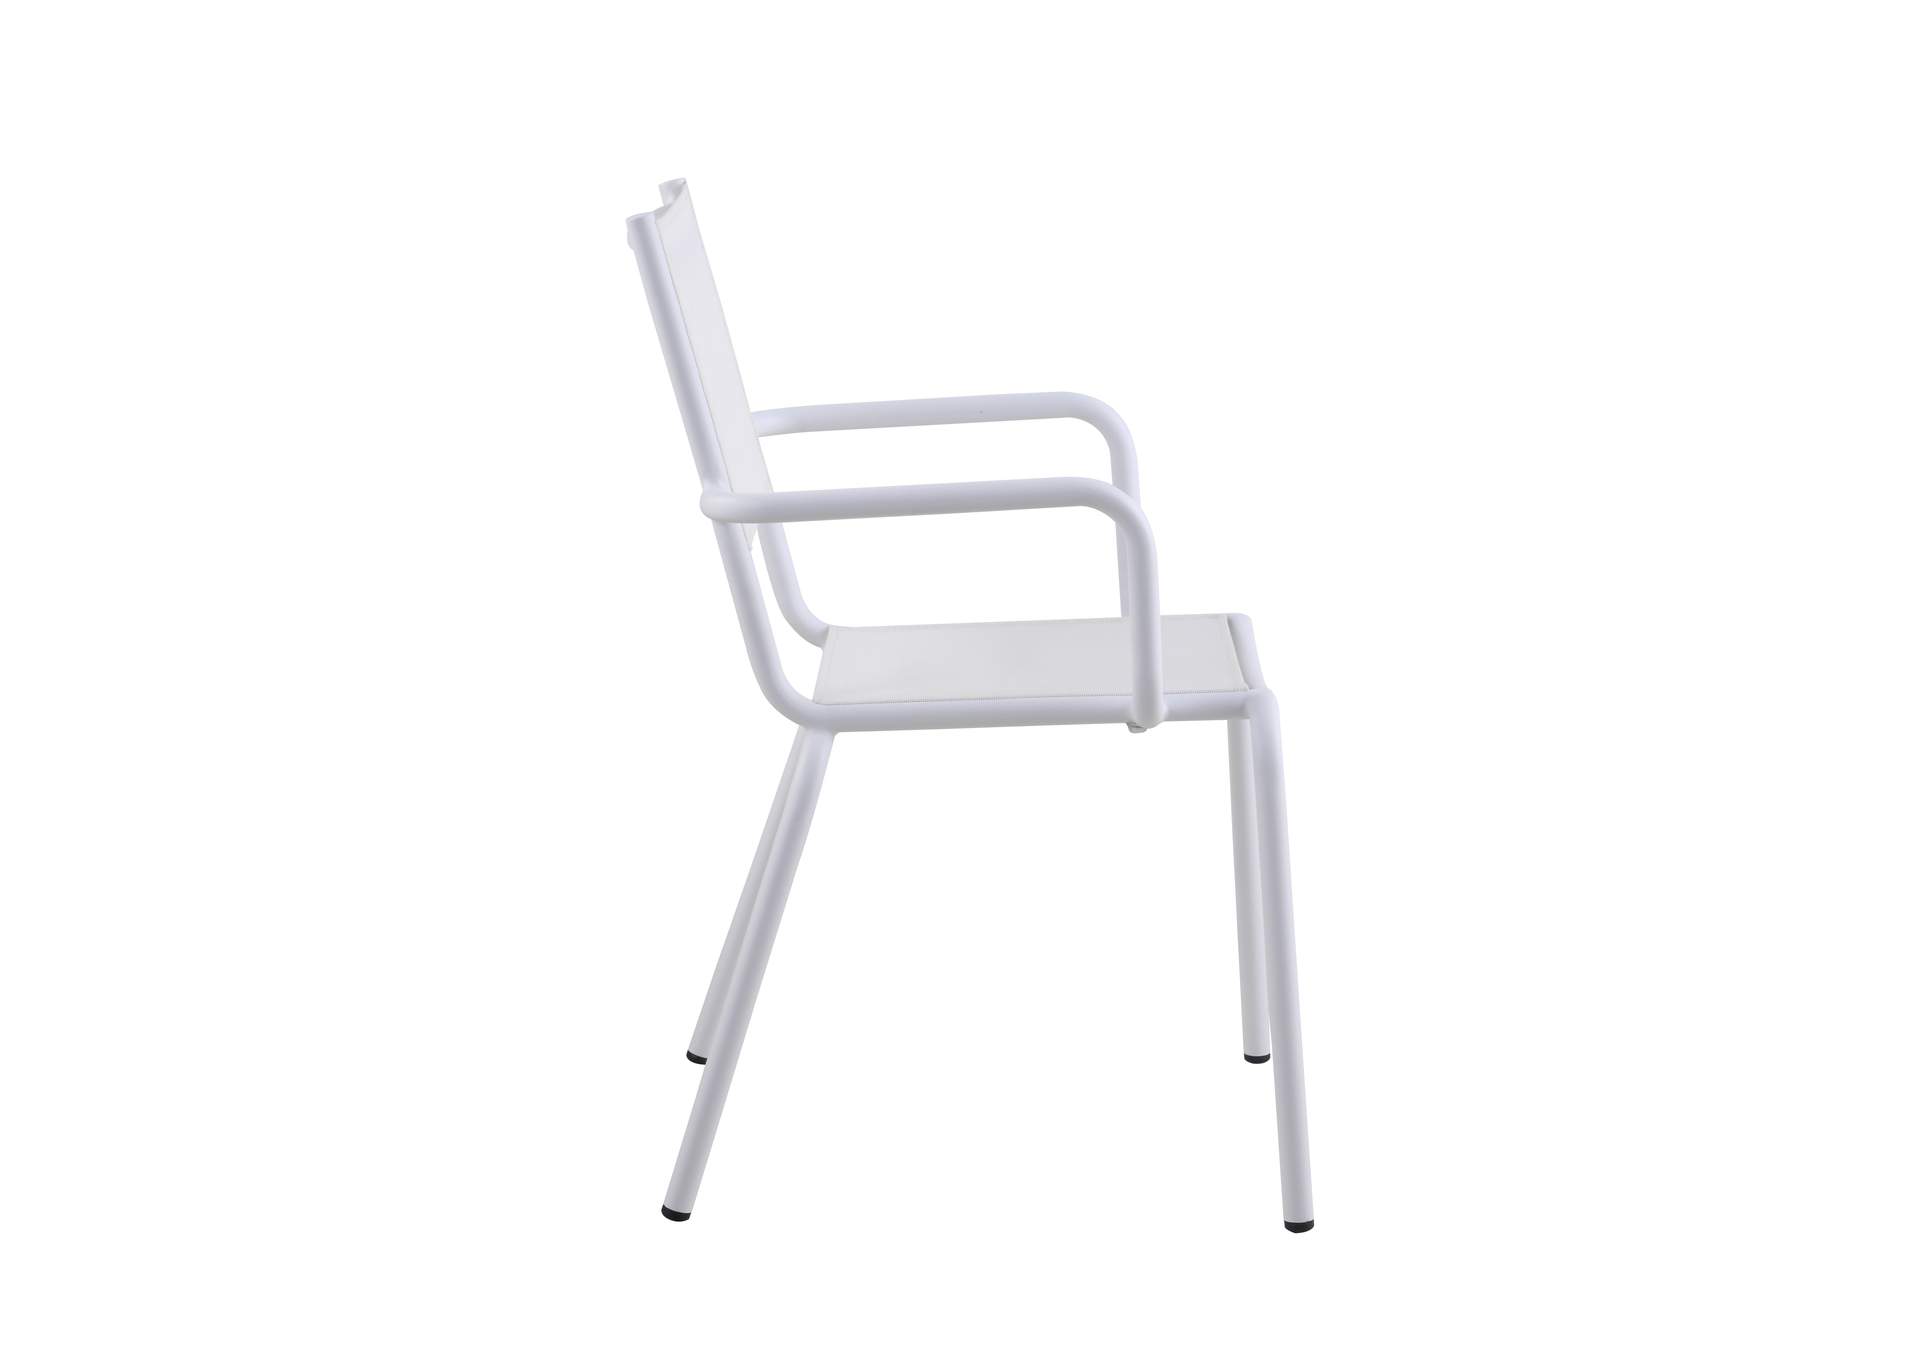 Outdoor Arm Chair w/ Aluminum Frame,Chintaly Imports